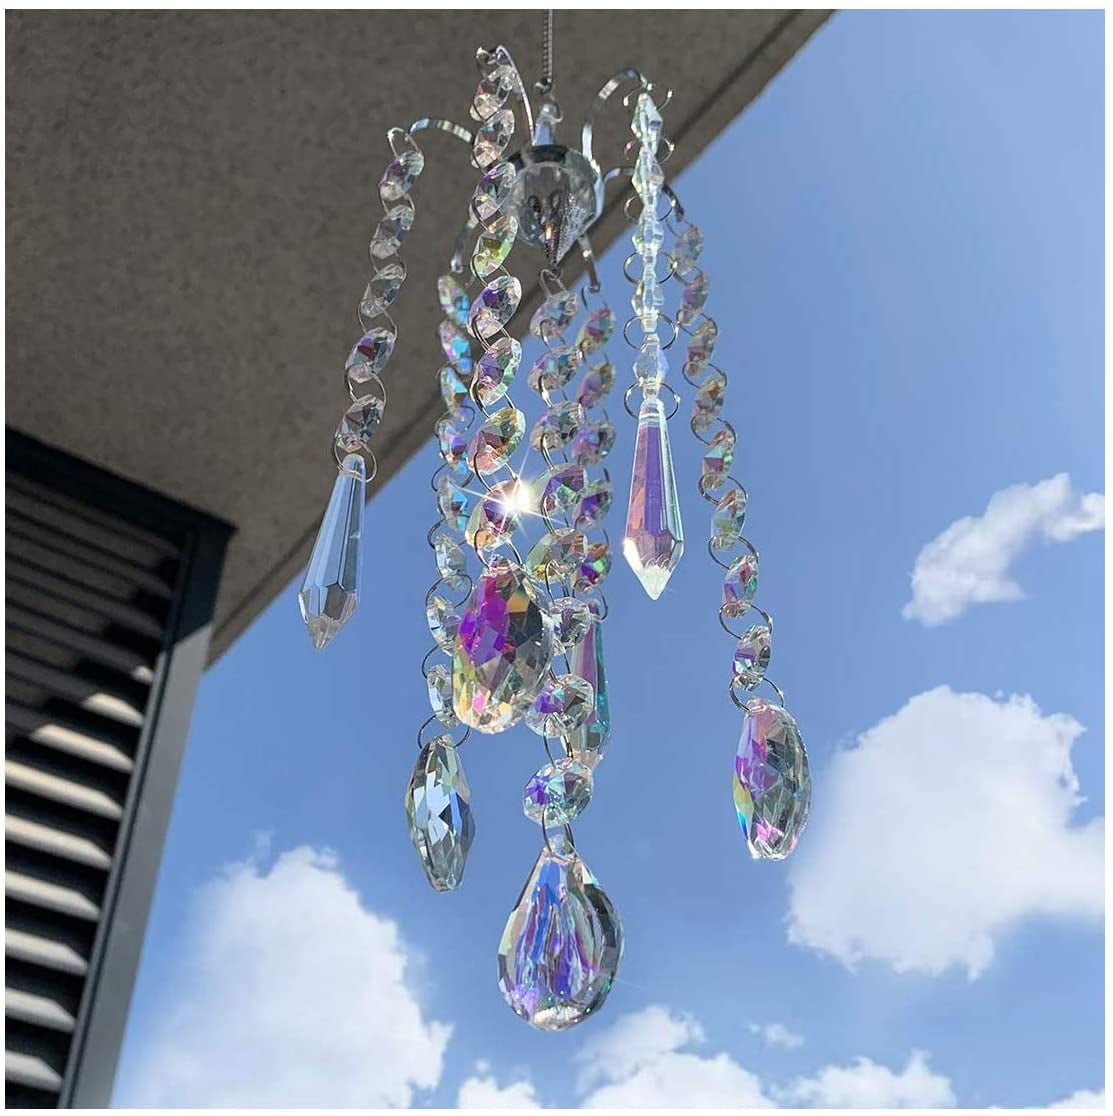 Celebrations Holidays Gift AB Crystal Prisms for Suncatchers Rainbow Maker Sun Catcher Hanging Crystals Decor Perfect for Home